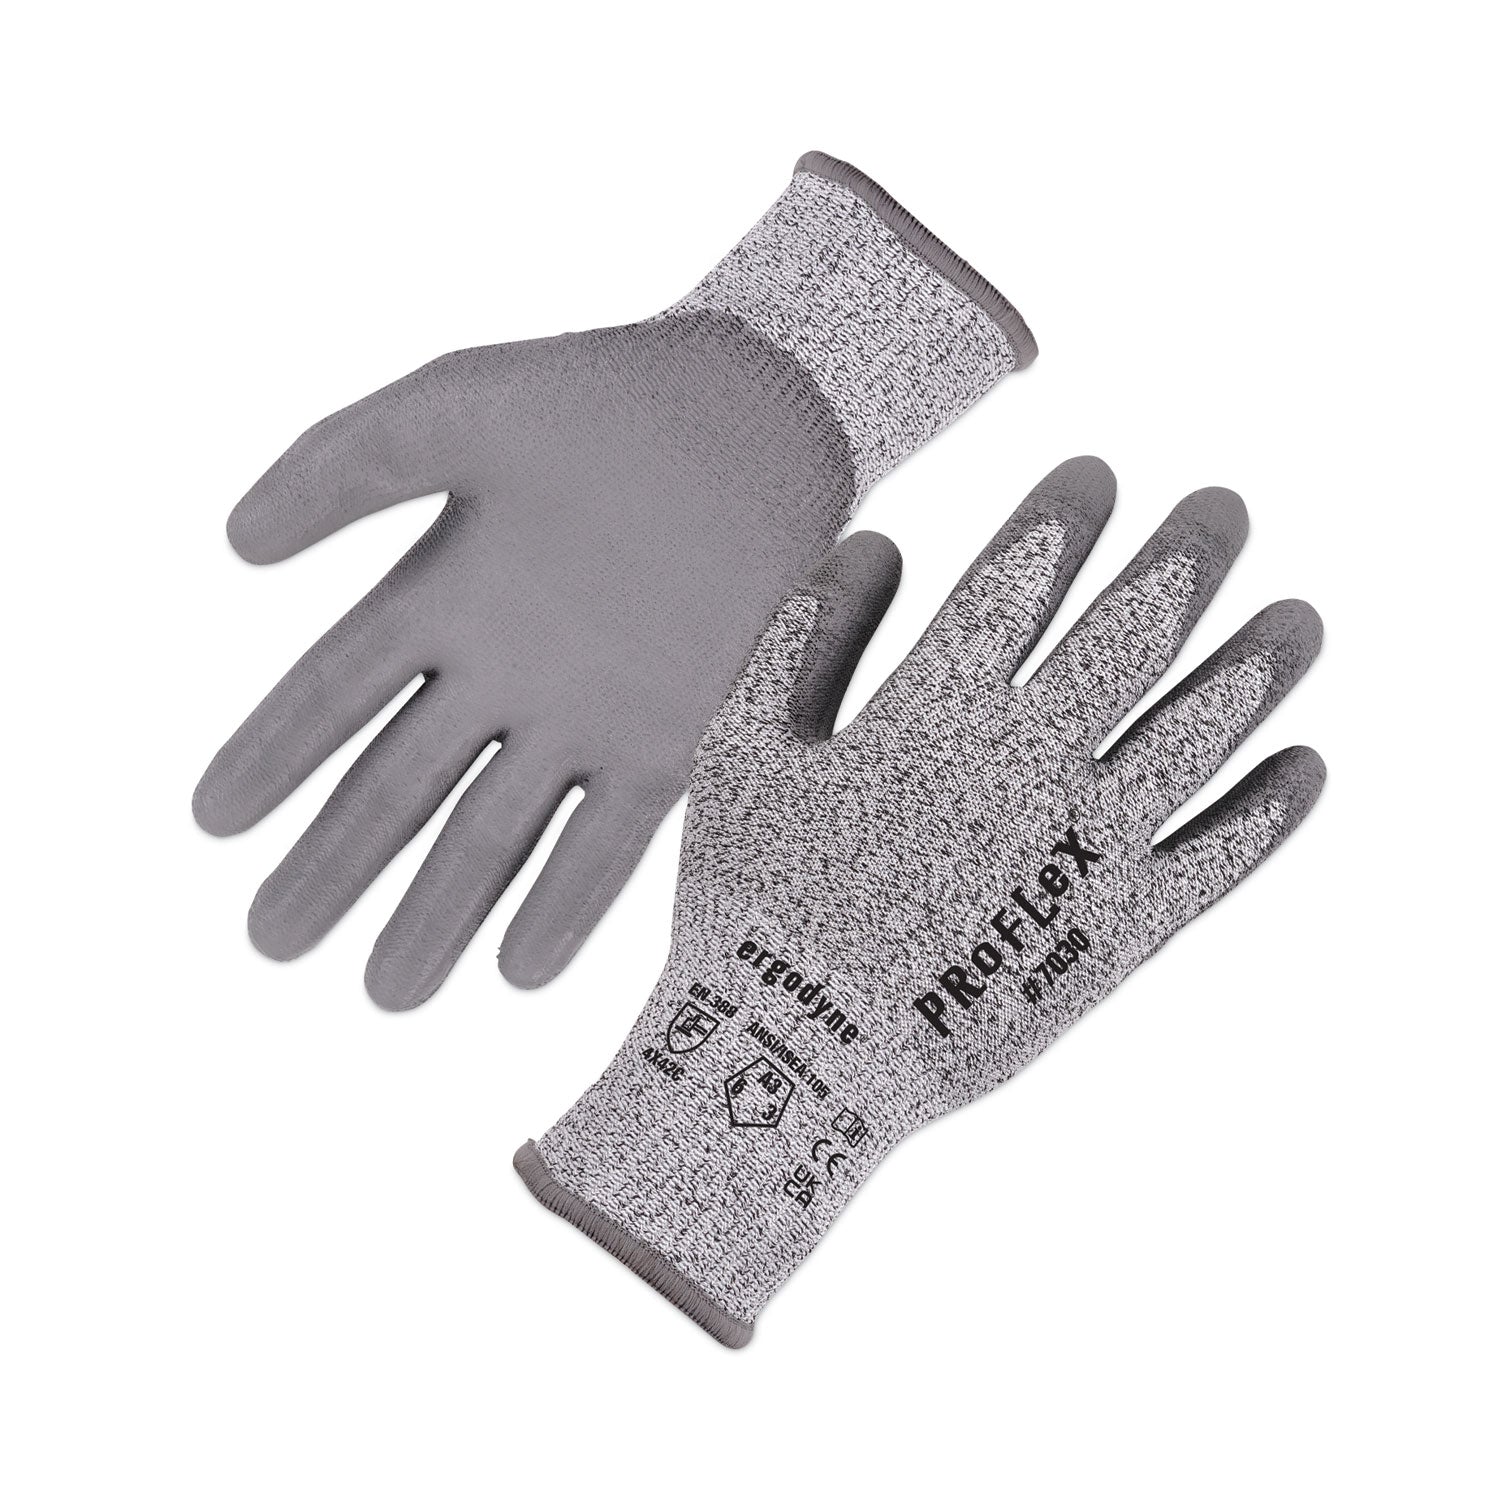 proflex-7030-ansi-a3-pu-coated-cr-gloves-gray-large-pair-ships-in-1-3-business-days_ego10464 - 1